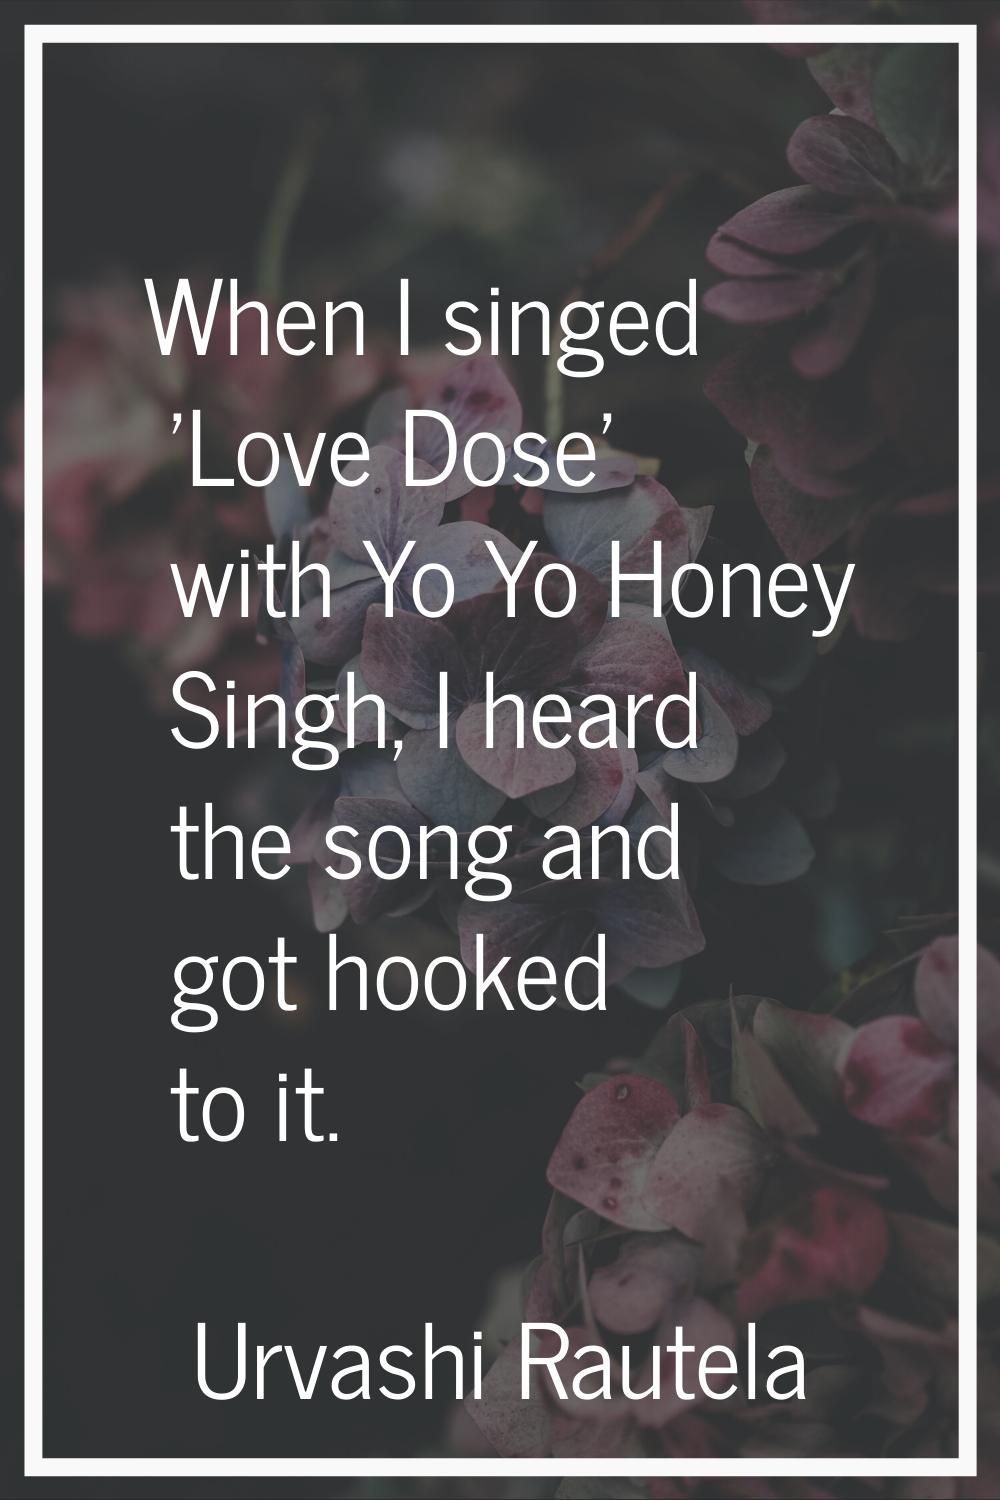 When I singed 'Love Dose' with Yo Yo Honey Singh, I heard the song and got hooked to it.